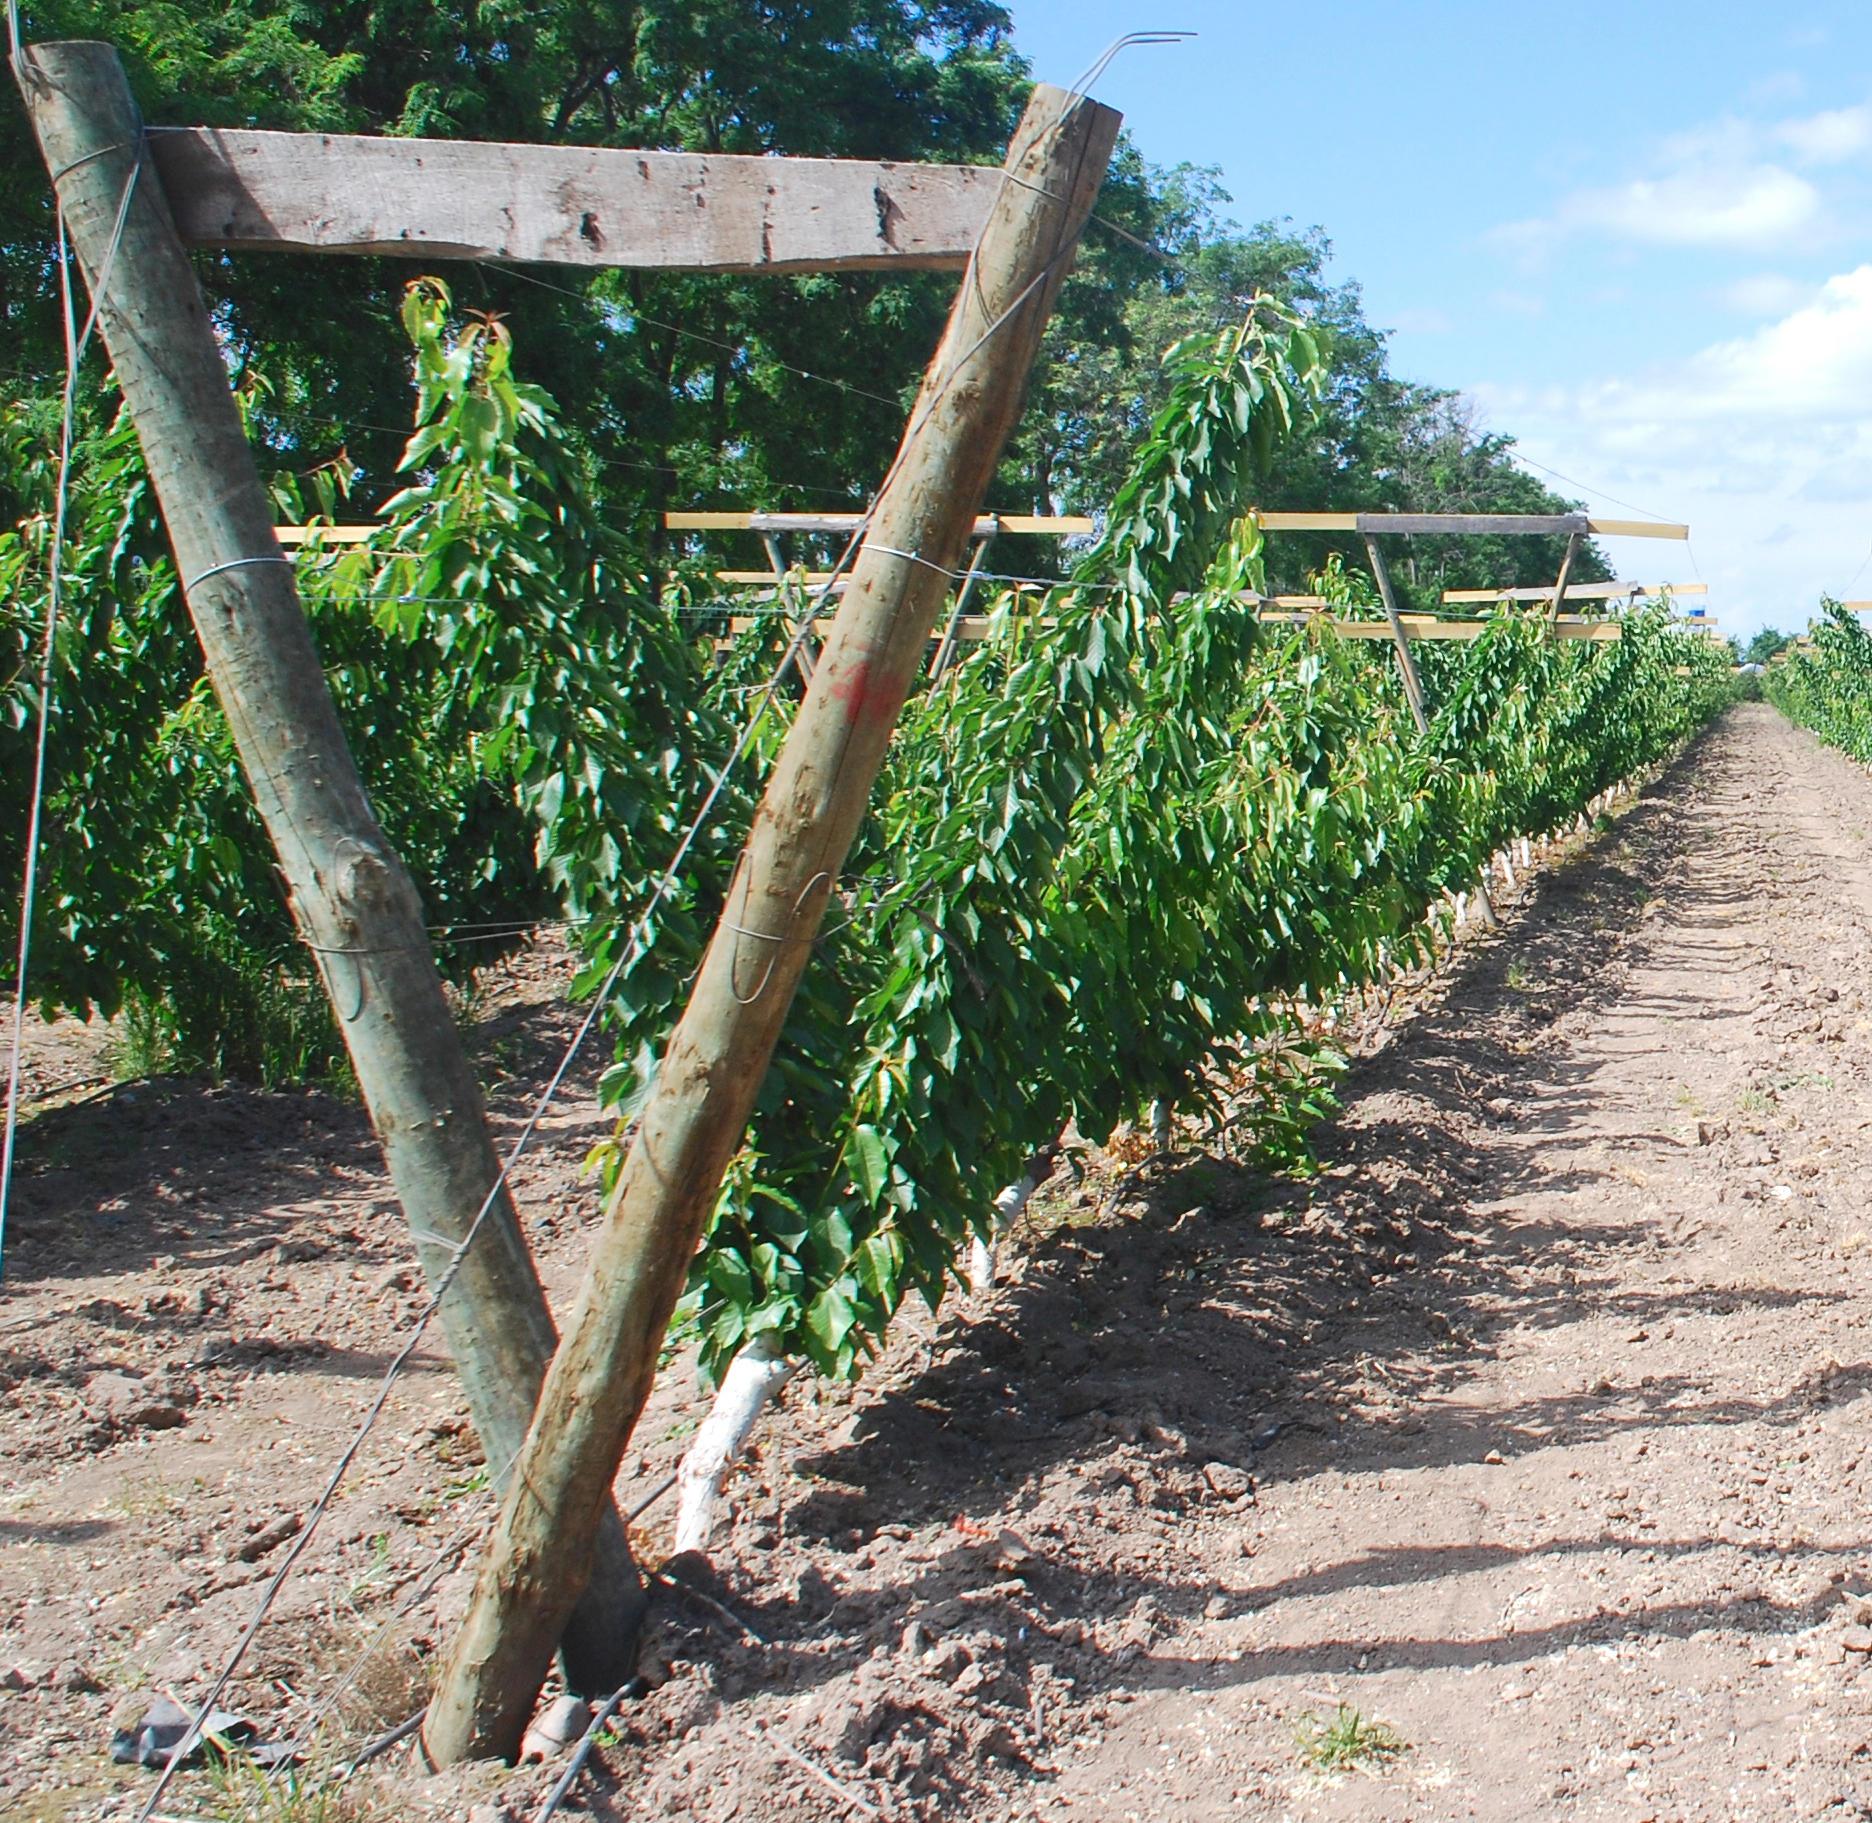 A V-shaped trellis supports a row of young cherry trees.